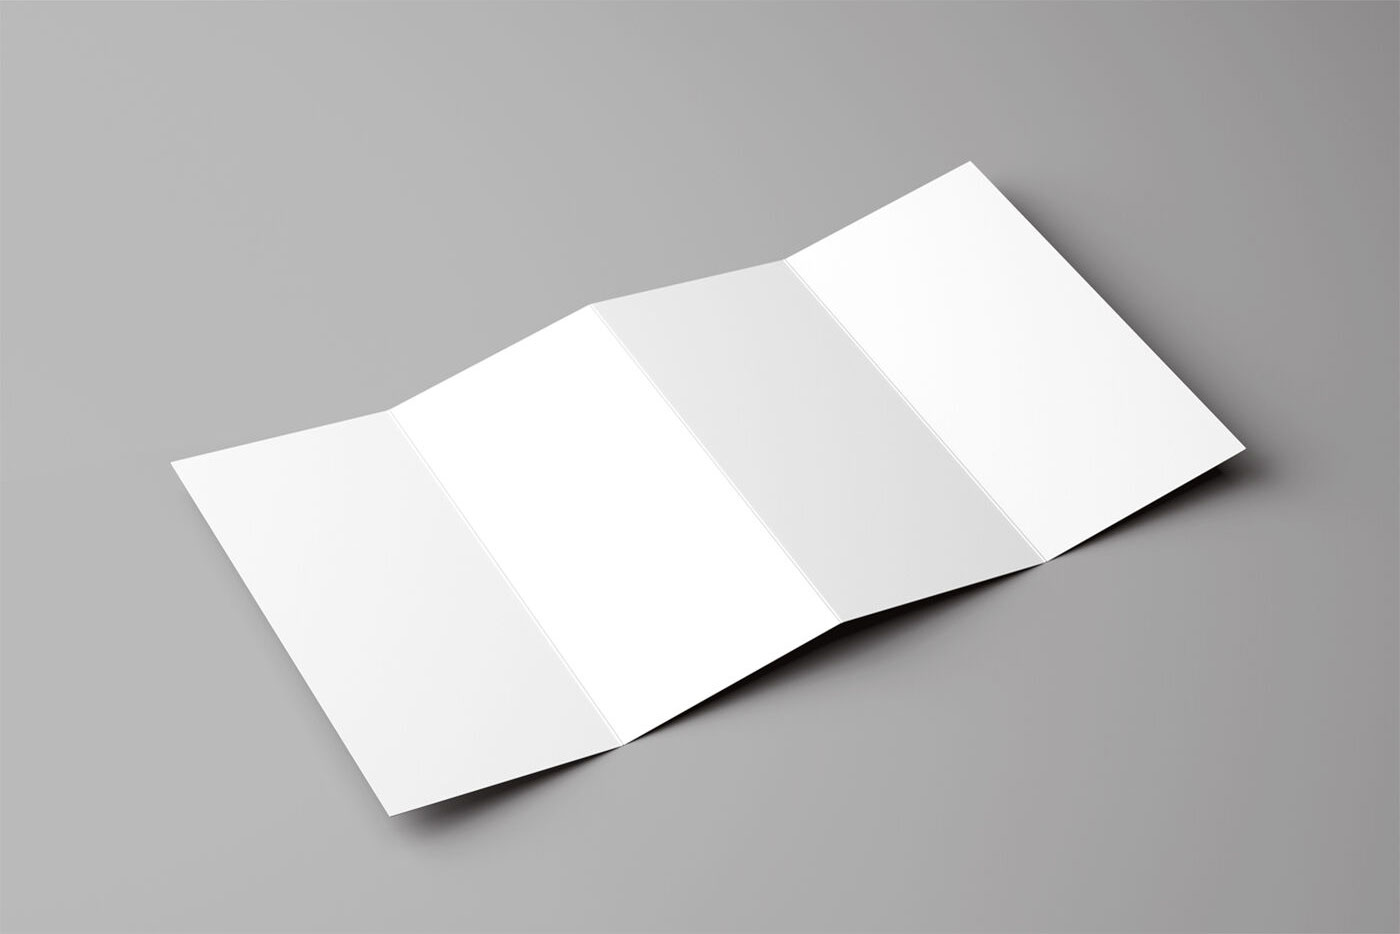 Mockup Showing Side View of Opened Four-fold Brochure FREE PSD